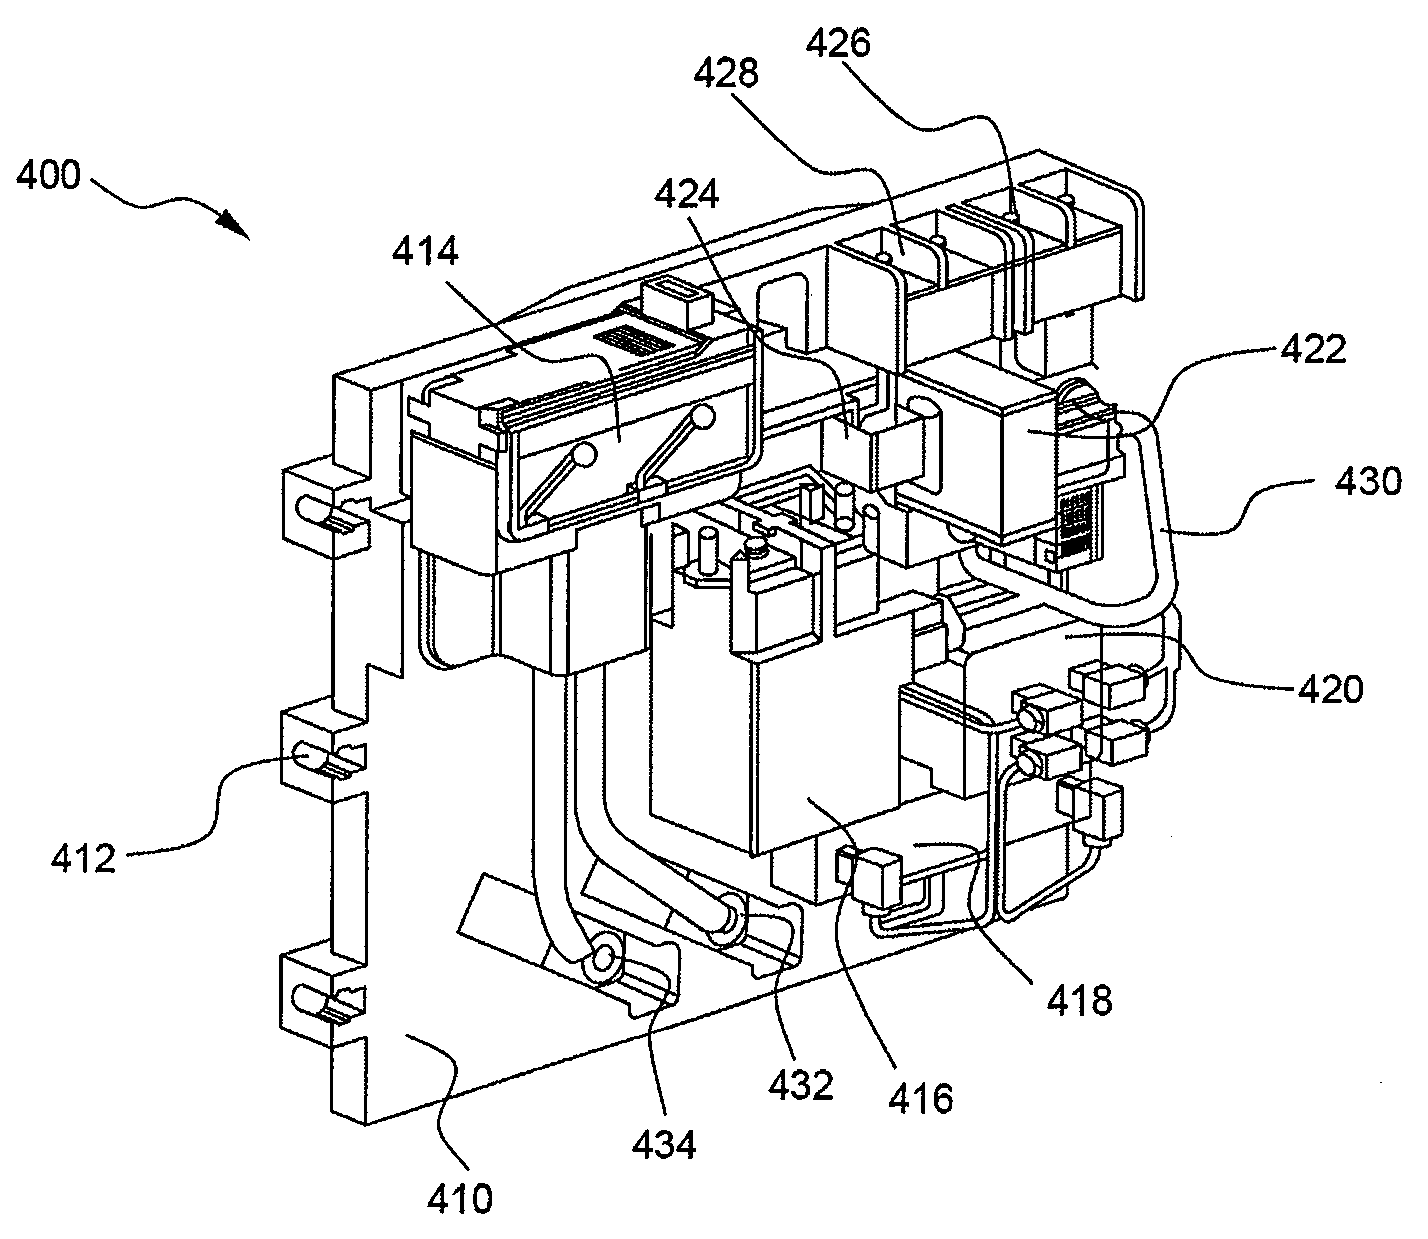 Power switching module for battery module assembly